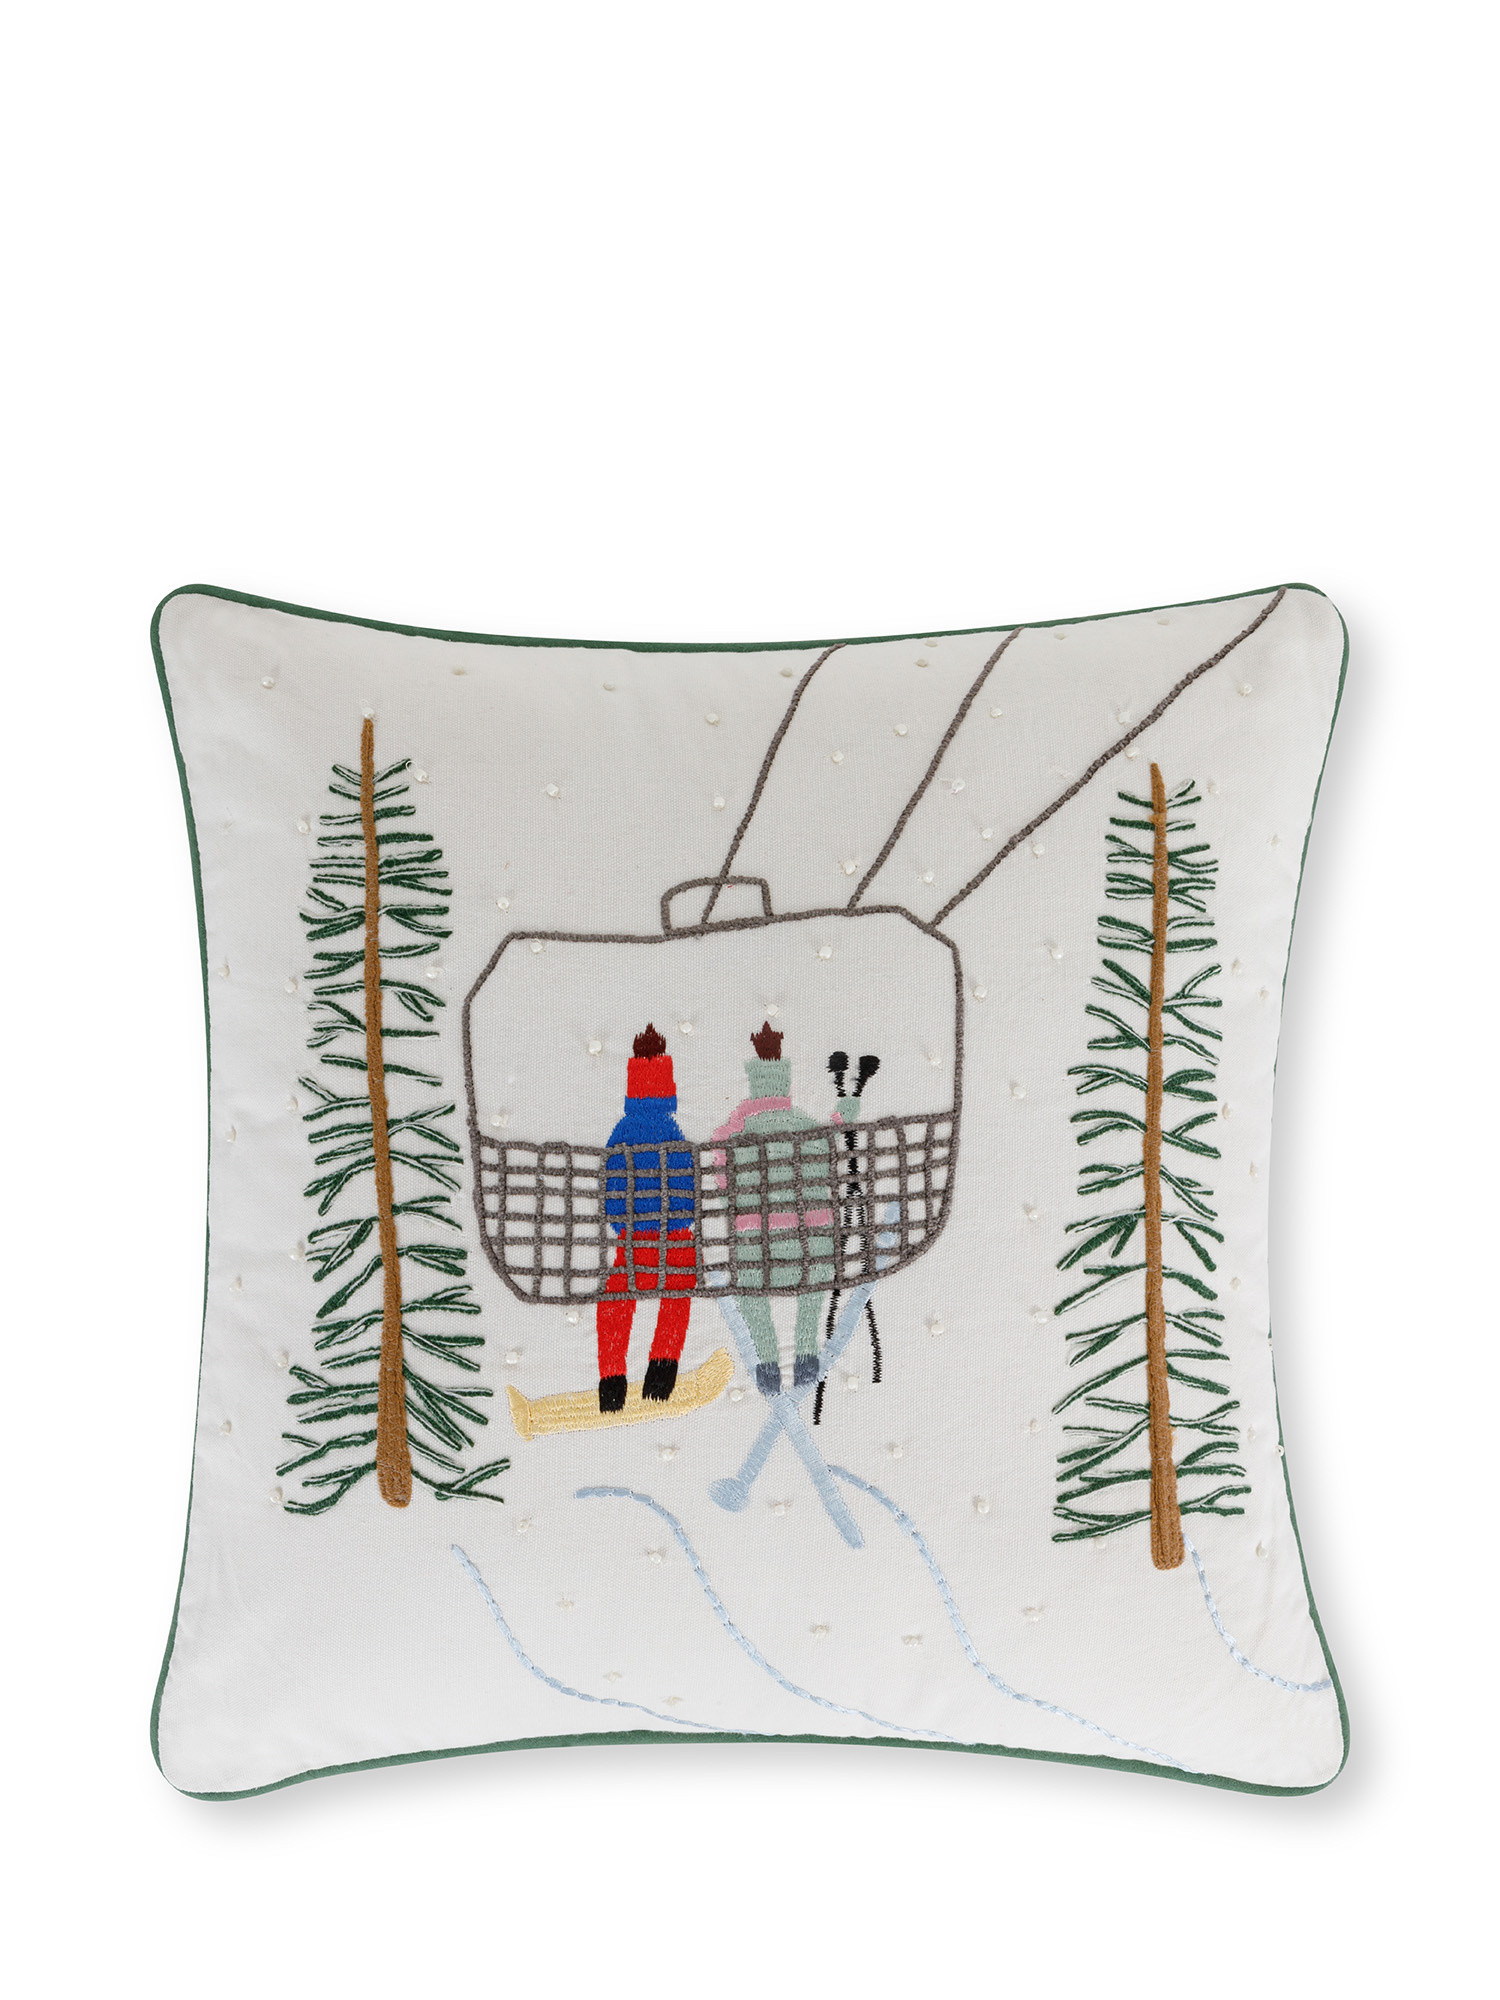 Chairlift embroidered cushion 45x45 cm, Multicolor, large image number 0